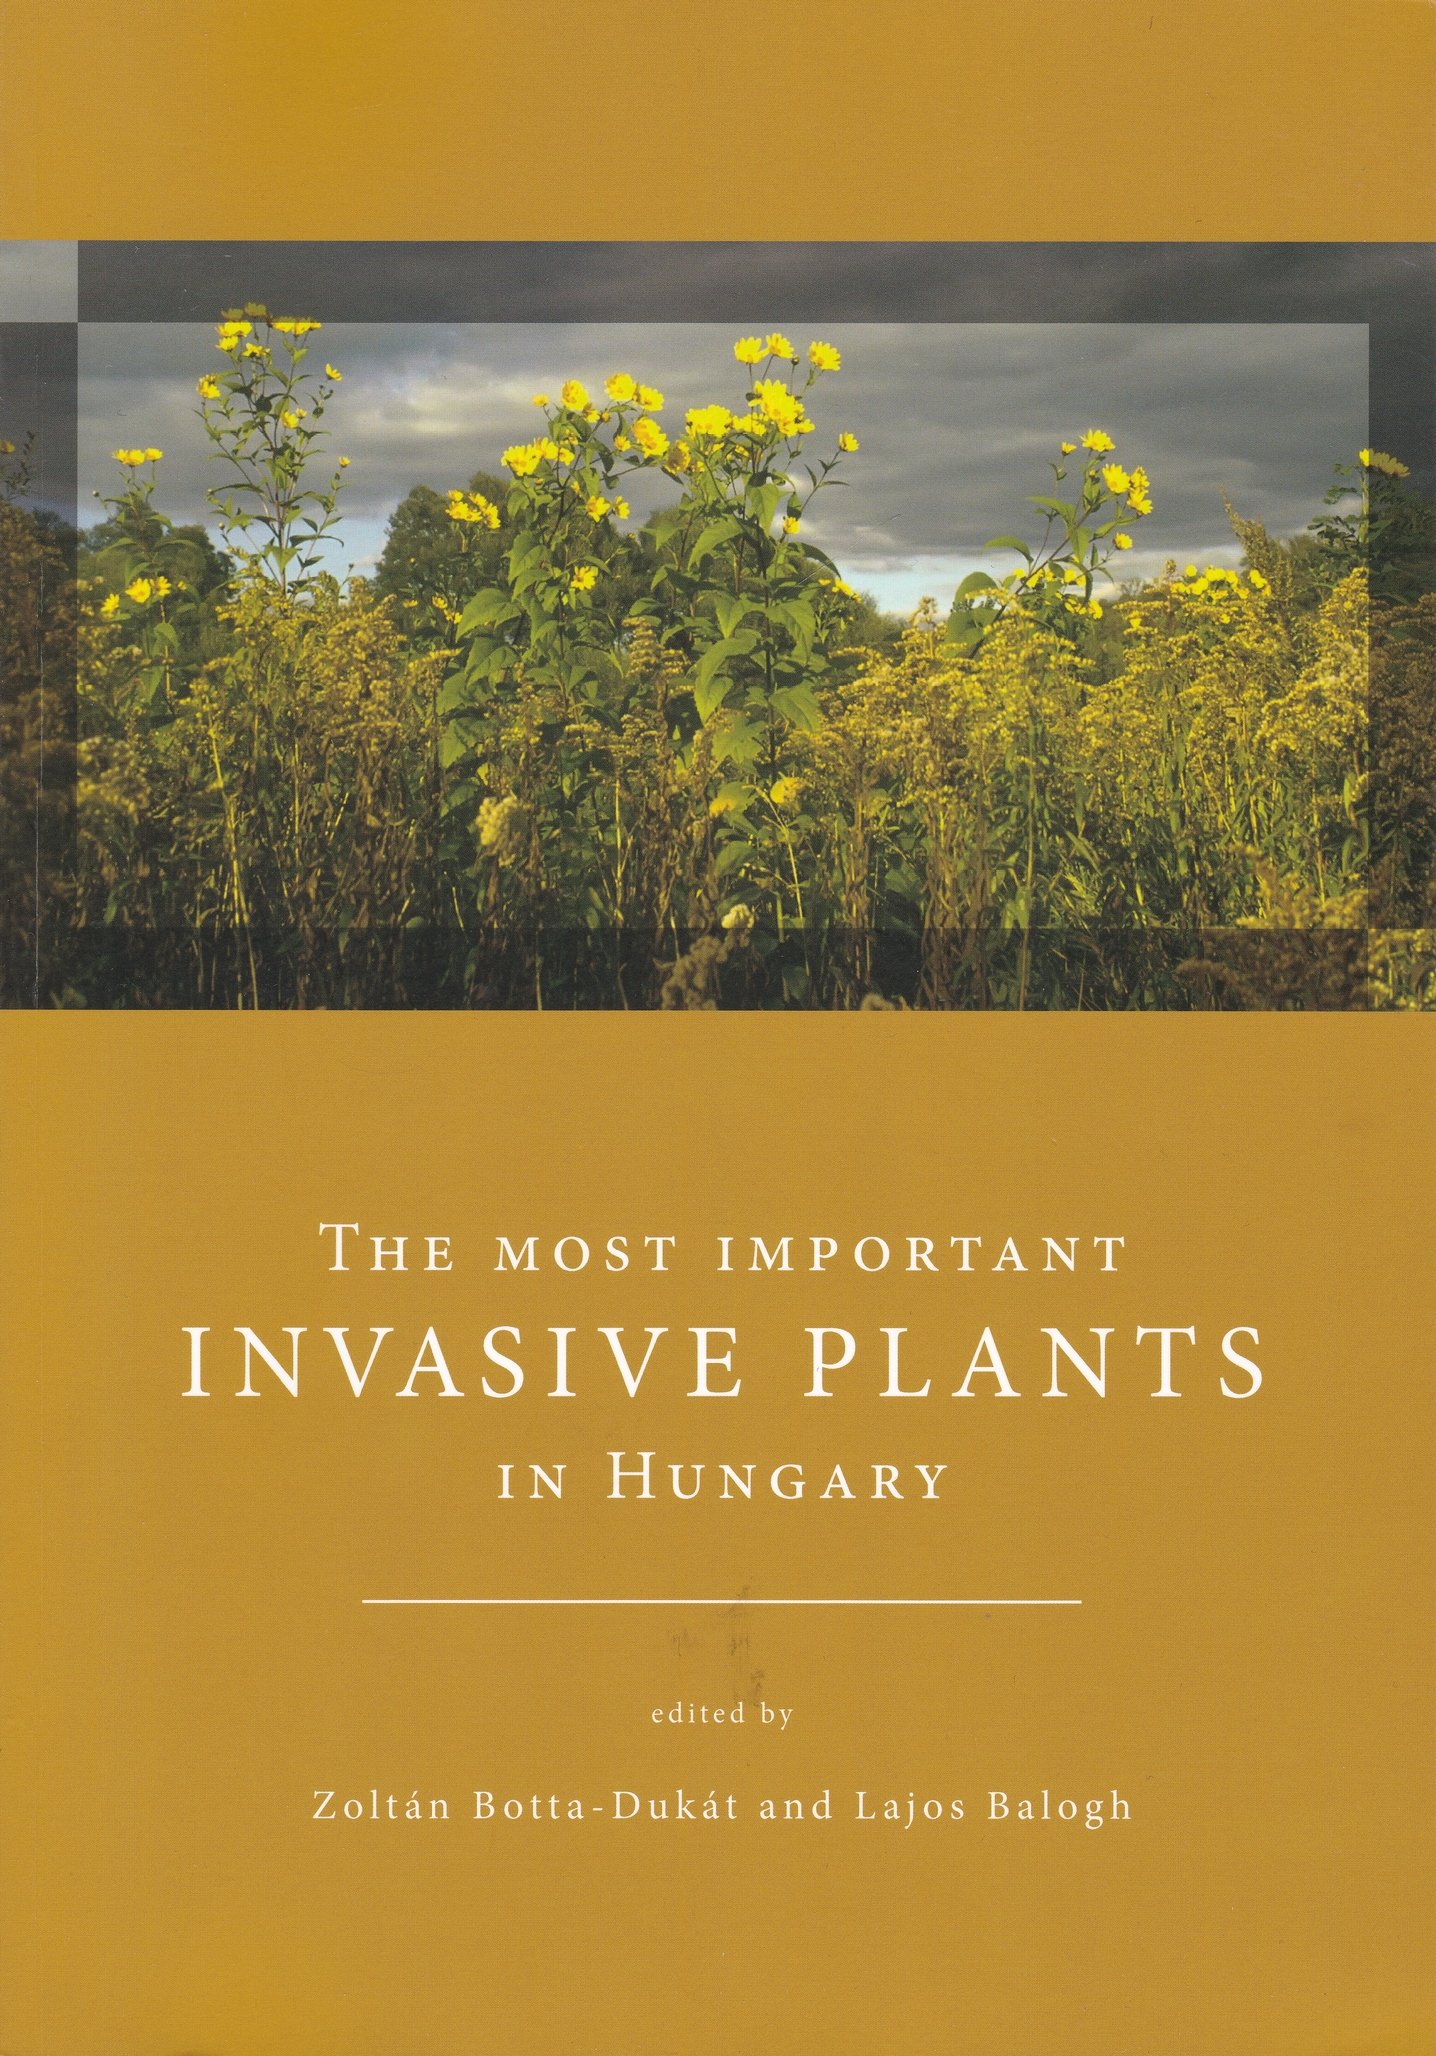 The most important invasive plants in Hungary (Rippl-Rónai Múzeum CC BY-NC-ND)